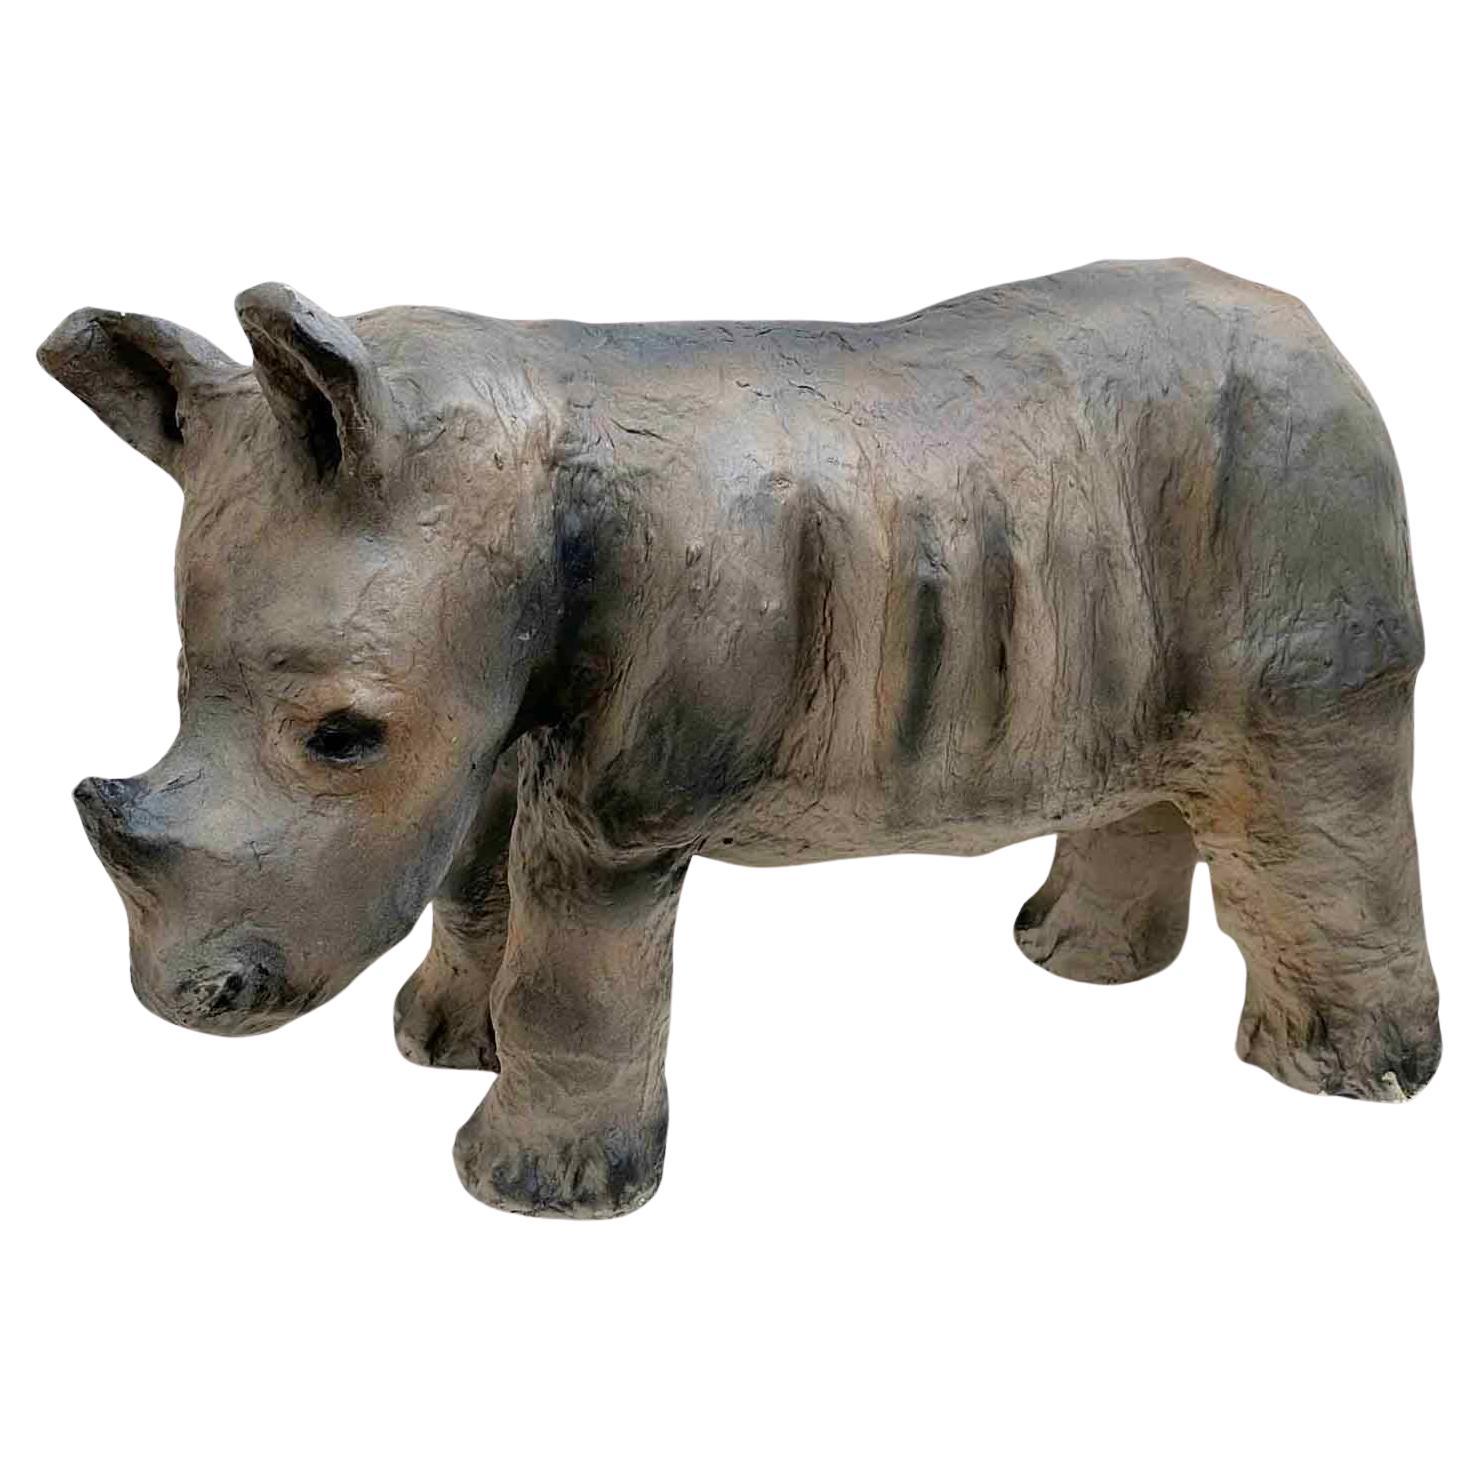 Vintage Paper Mache Rhinoceros Animal Sculpture or Collectible For Sale